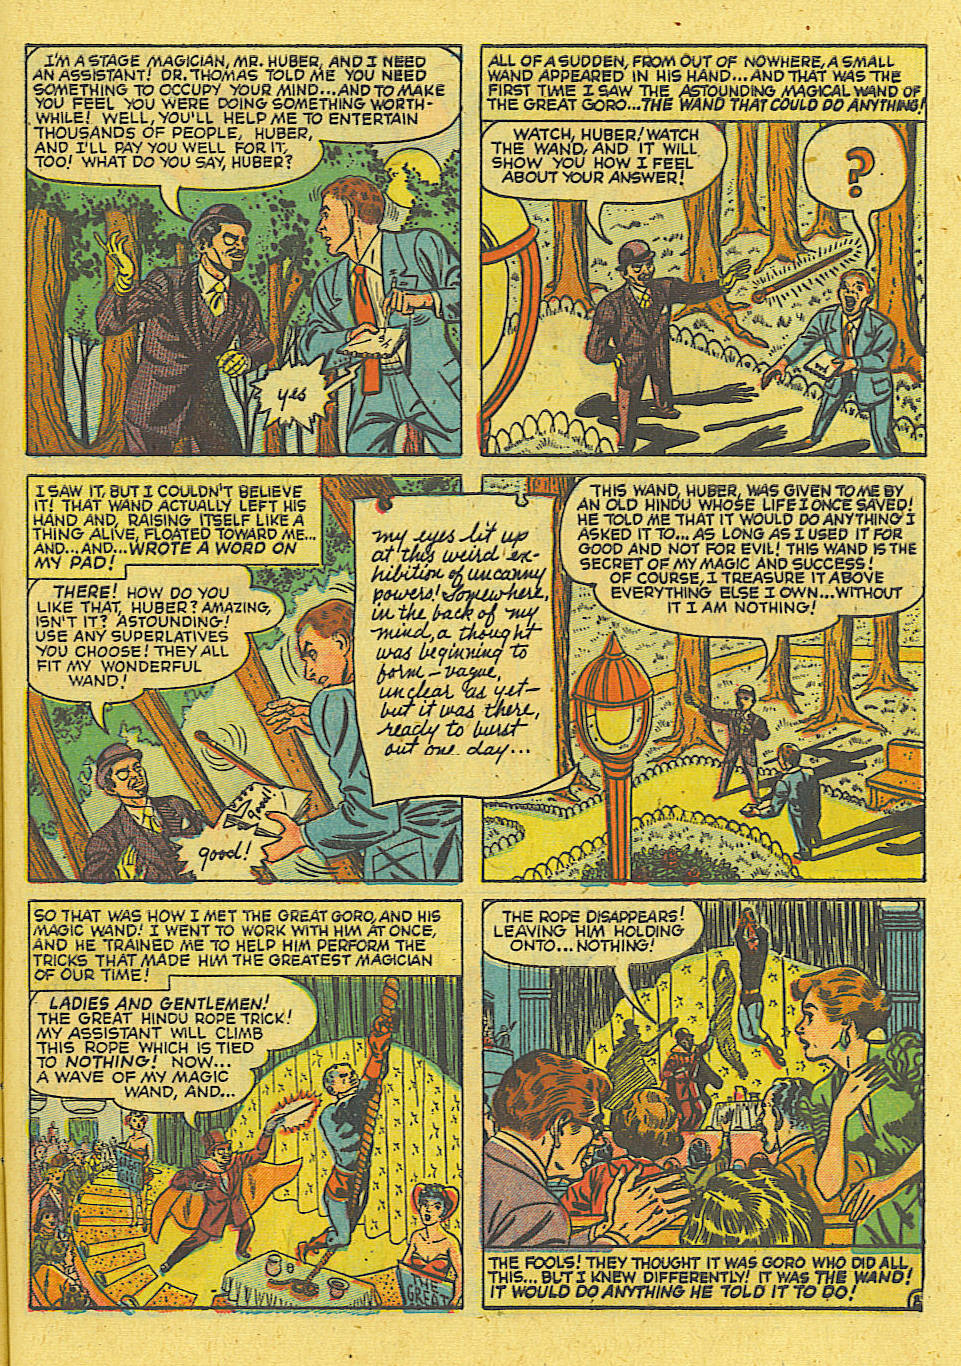 Marvel Tales (1949) 103 Page 20